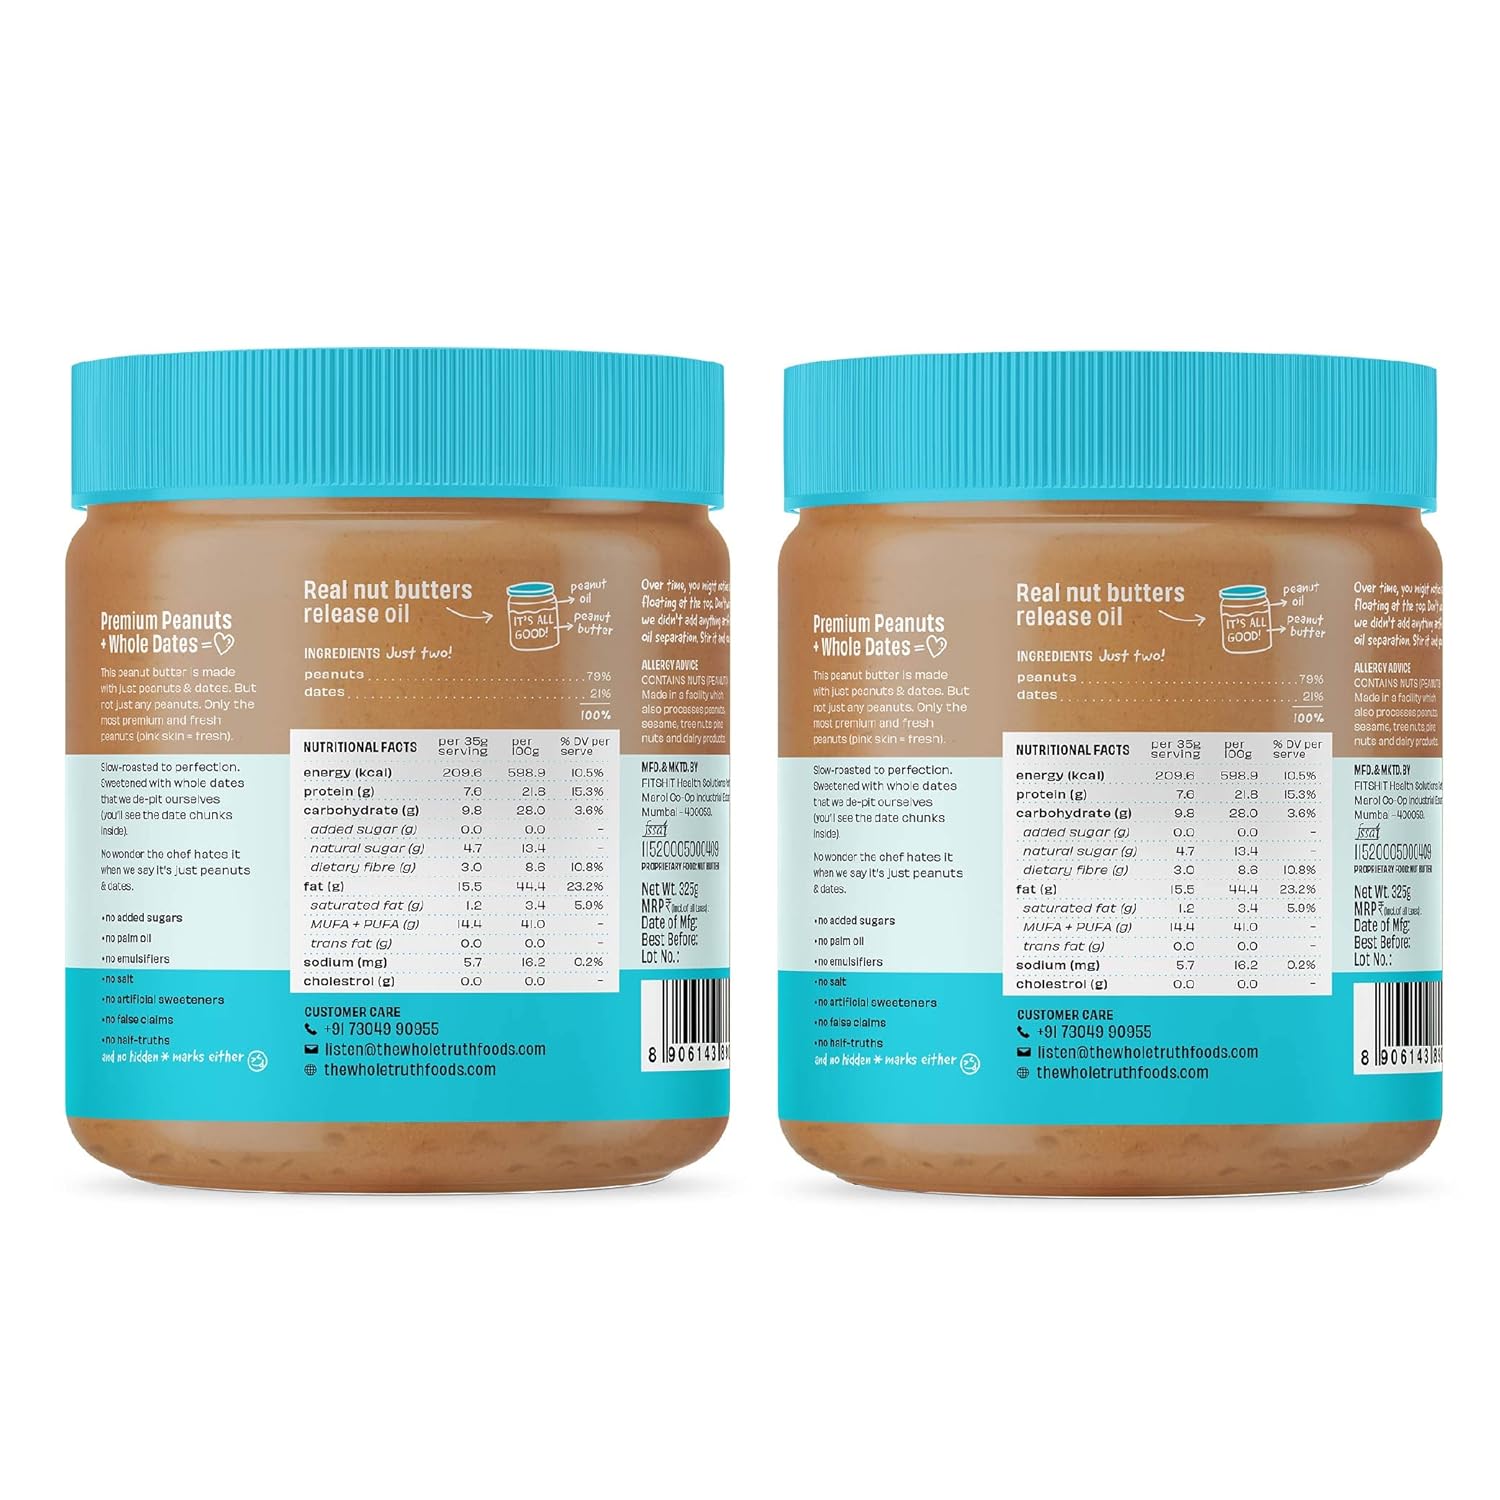 The Whole Truth - Peanut Butter with Dates | Pack of 2 | 650 g | Crunchy | No Added Sugar | No Artificial Sweeteners | Vegan | Gluten Free | No Preservatives | 100% Natural